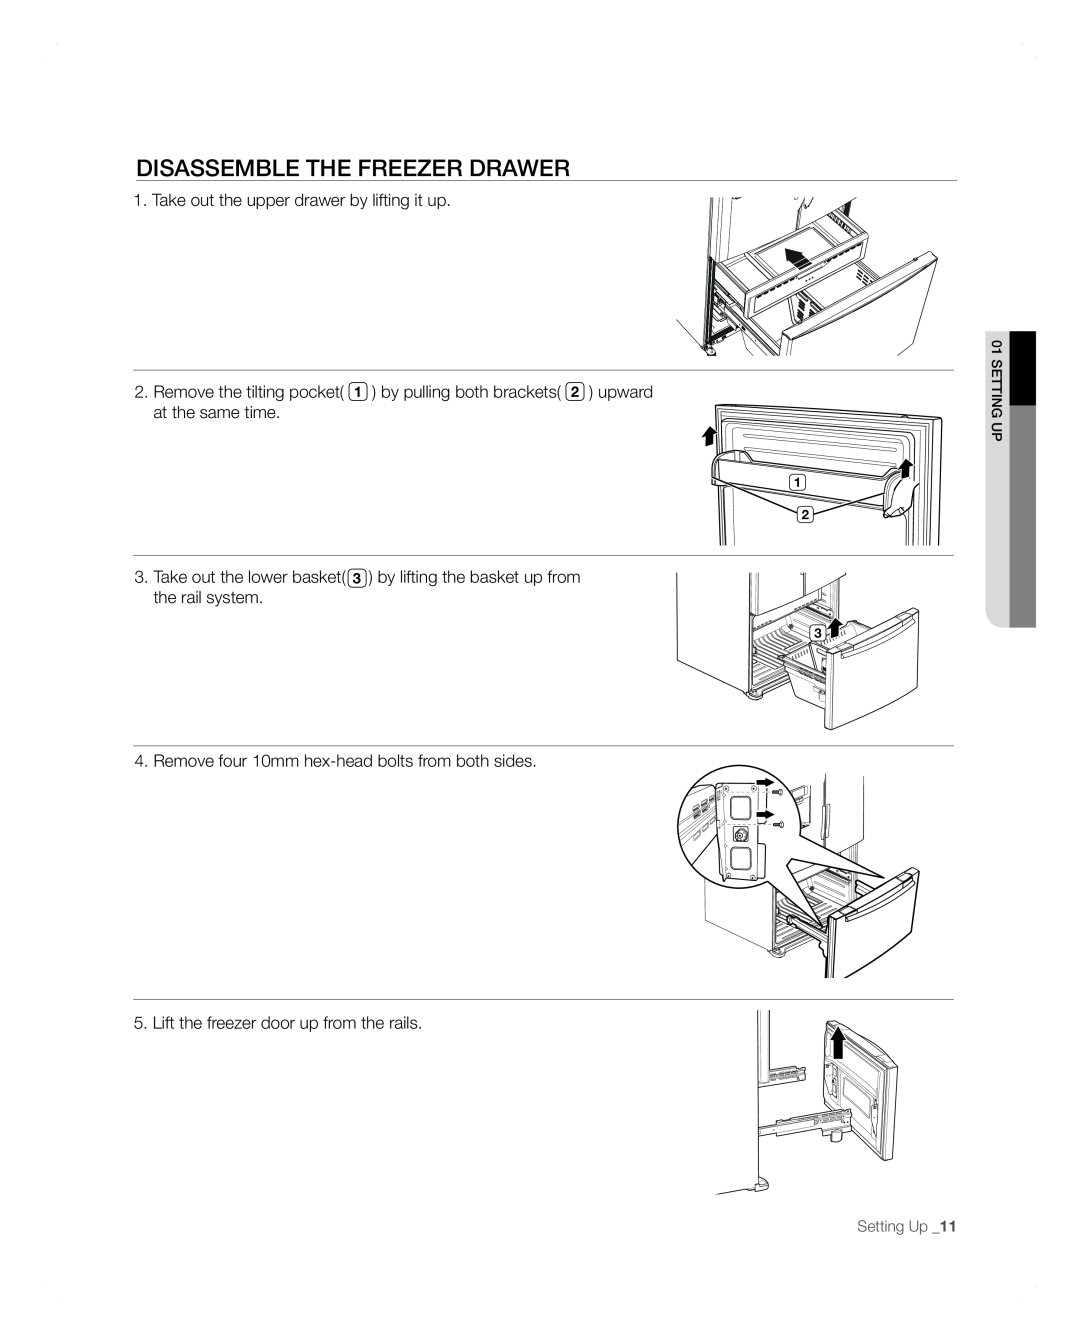 Samsung RFG297AARS user manual disassemble the freezer drawer, Take out the upper drawer by lifting it up, Setting Up 